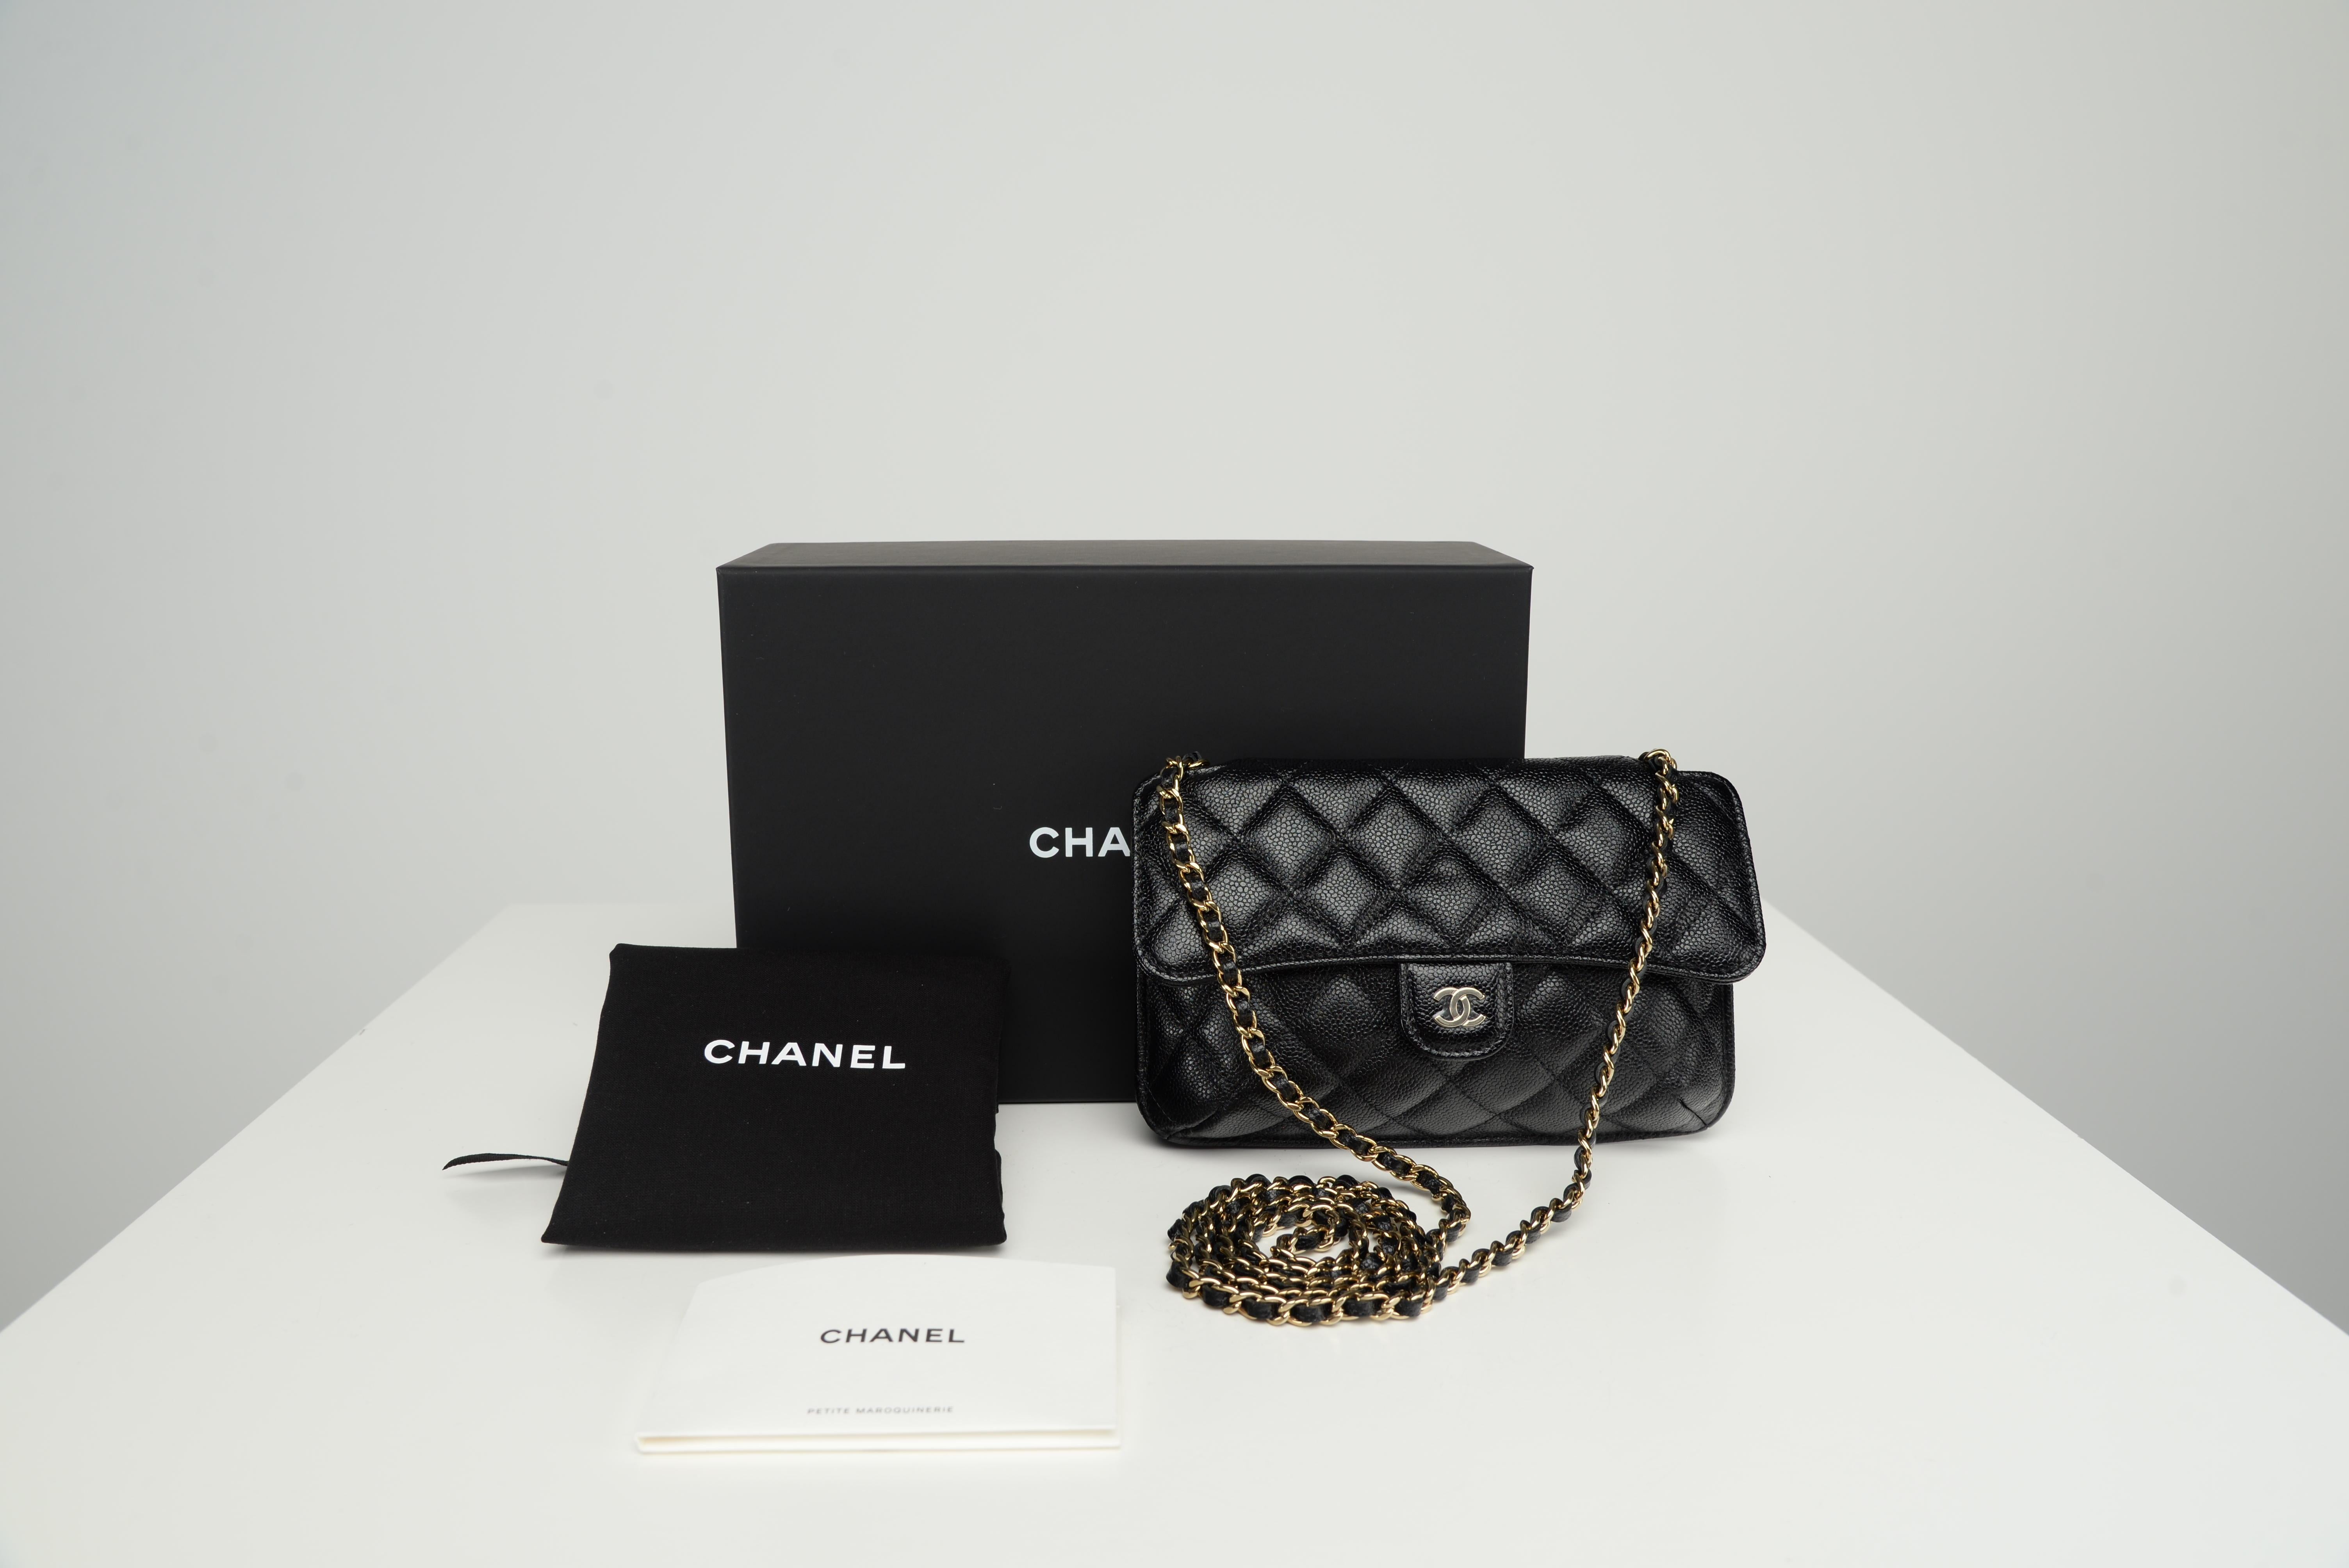 From the collection of SAVINETI we offer this Chanel Caviar Foldable Shopping Tote:
-	Brand: Chanel
-	Model: Foldable Shopping Tote with Chain
-	Year: 2022
-	Condition: NEW (unused)
-	Materials: Caviar leather, champagne-gold hardware
-	Extras: